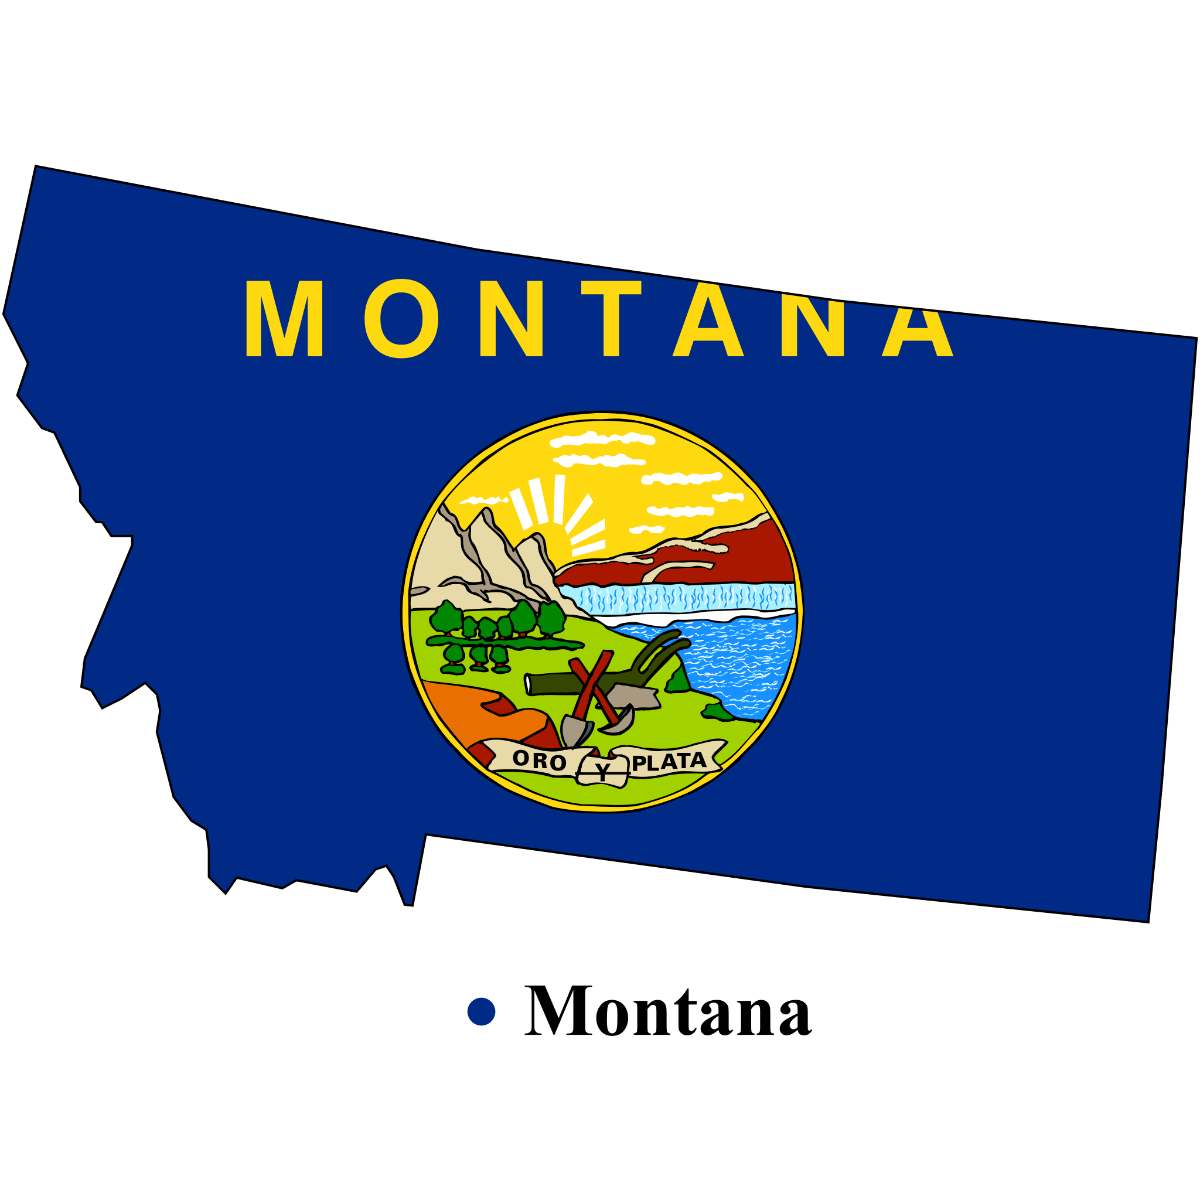 Montana State map cutout with Montana flag superimposed